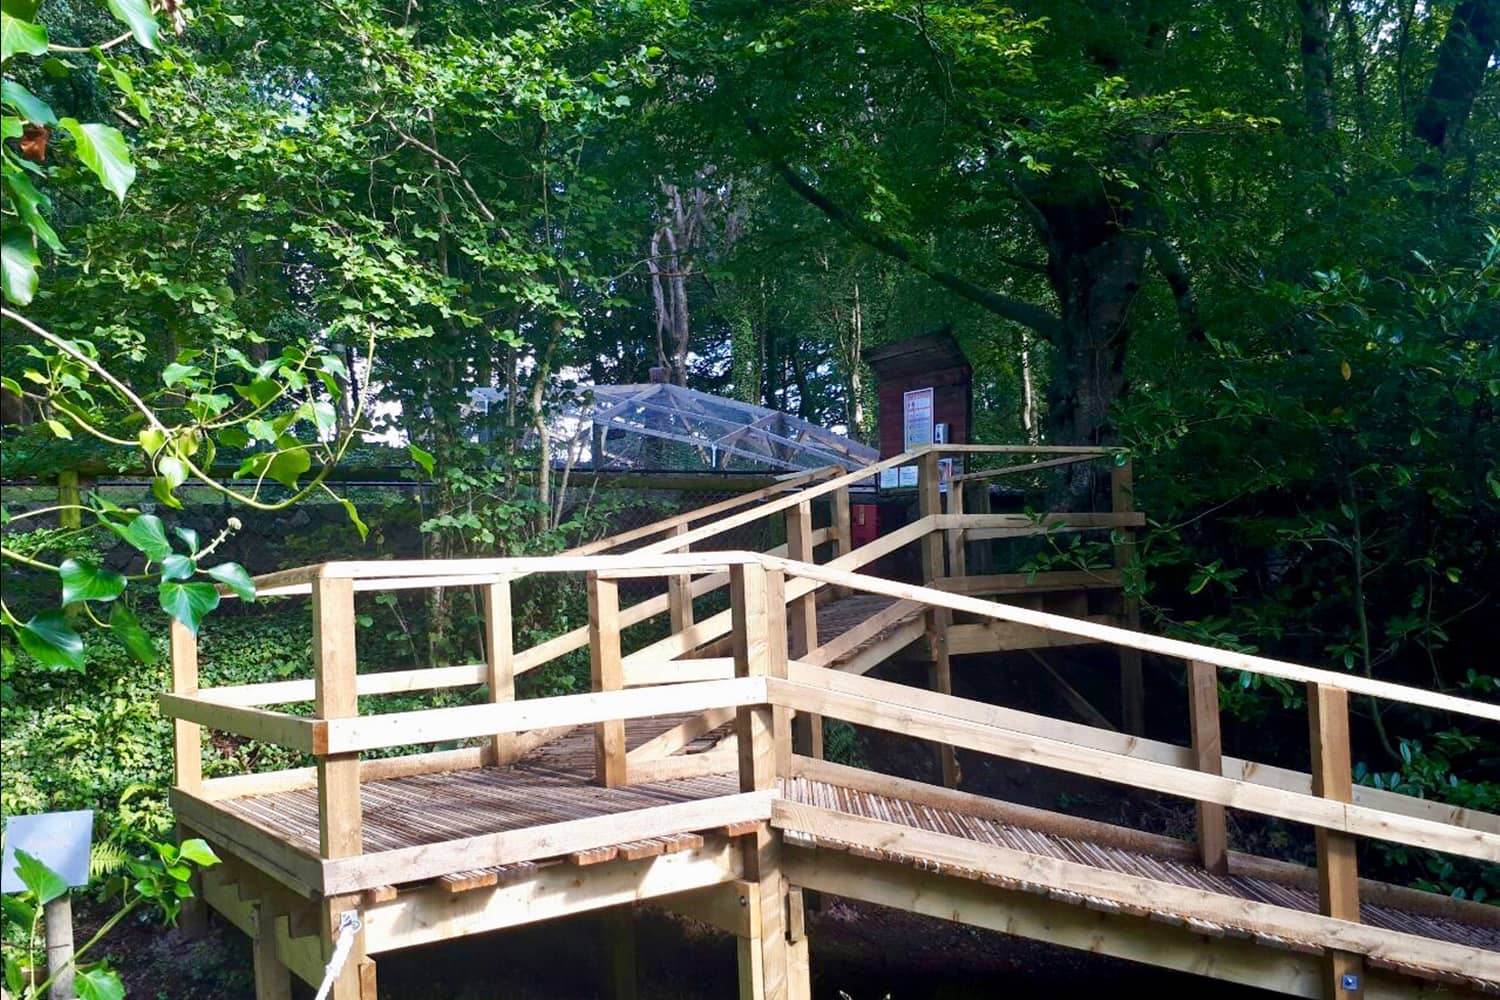 Non-slip timber decking donated for enclosure at Dartmoor Zoo